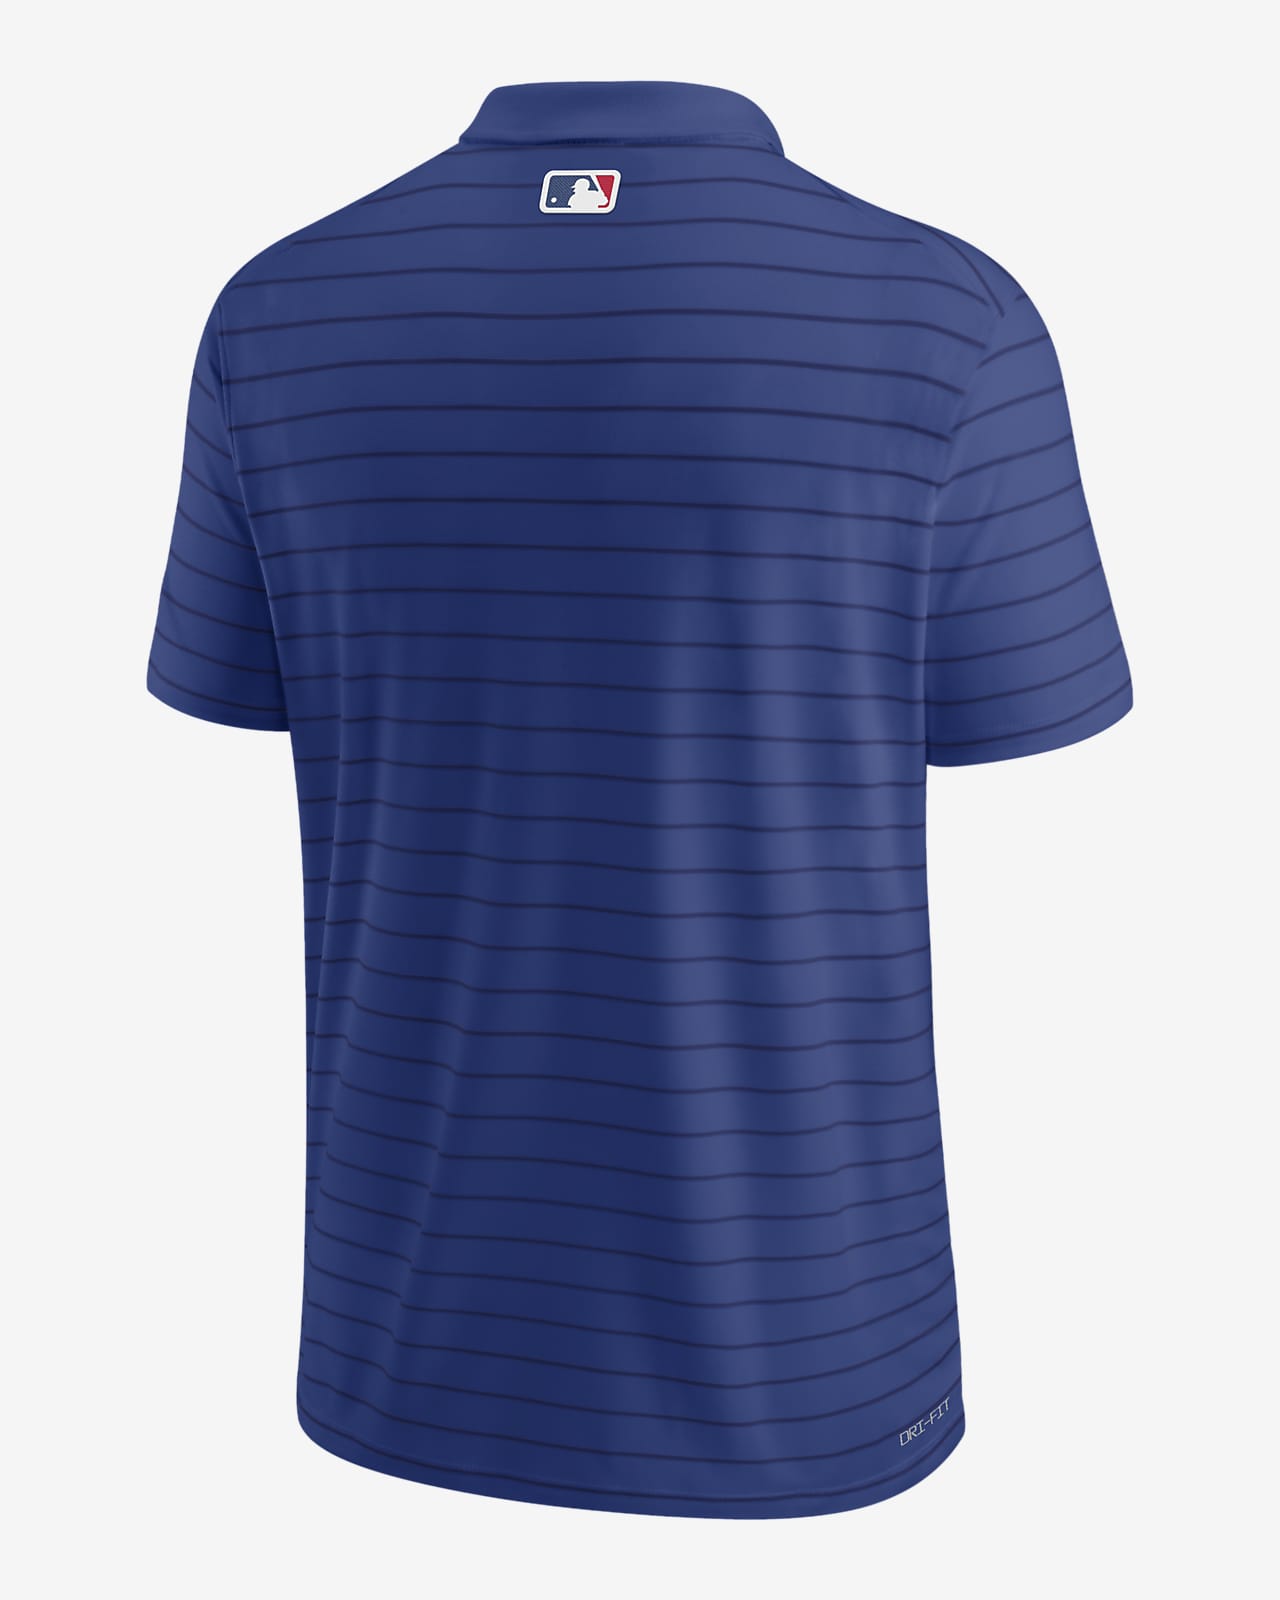 Nike Dri-FIT Victory Striped (MLB Chicago Cubs) Men's Polo